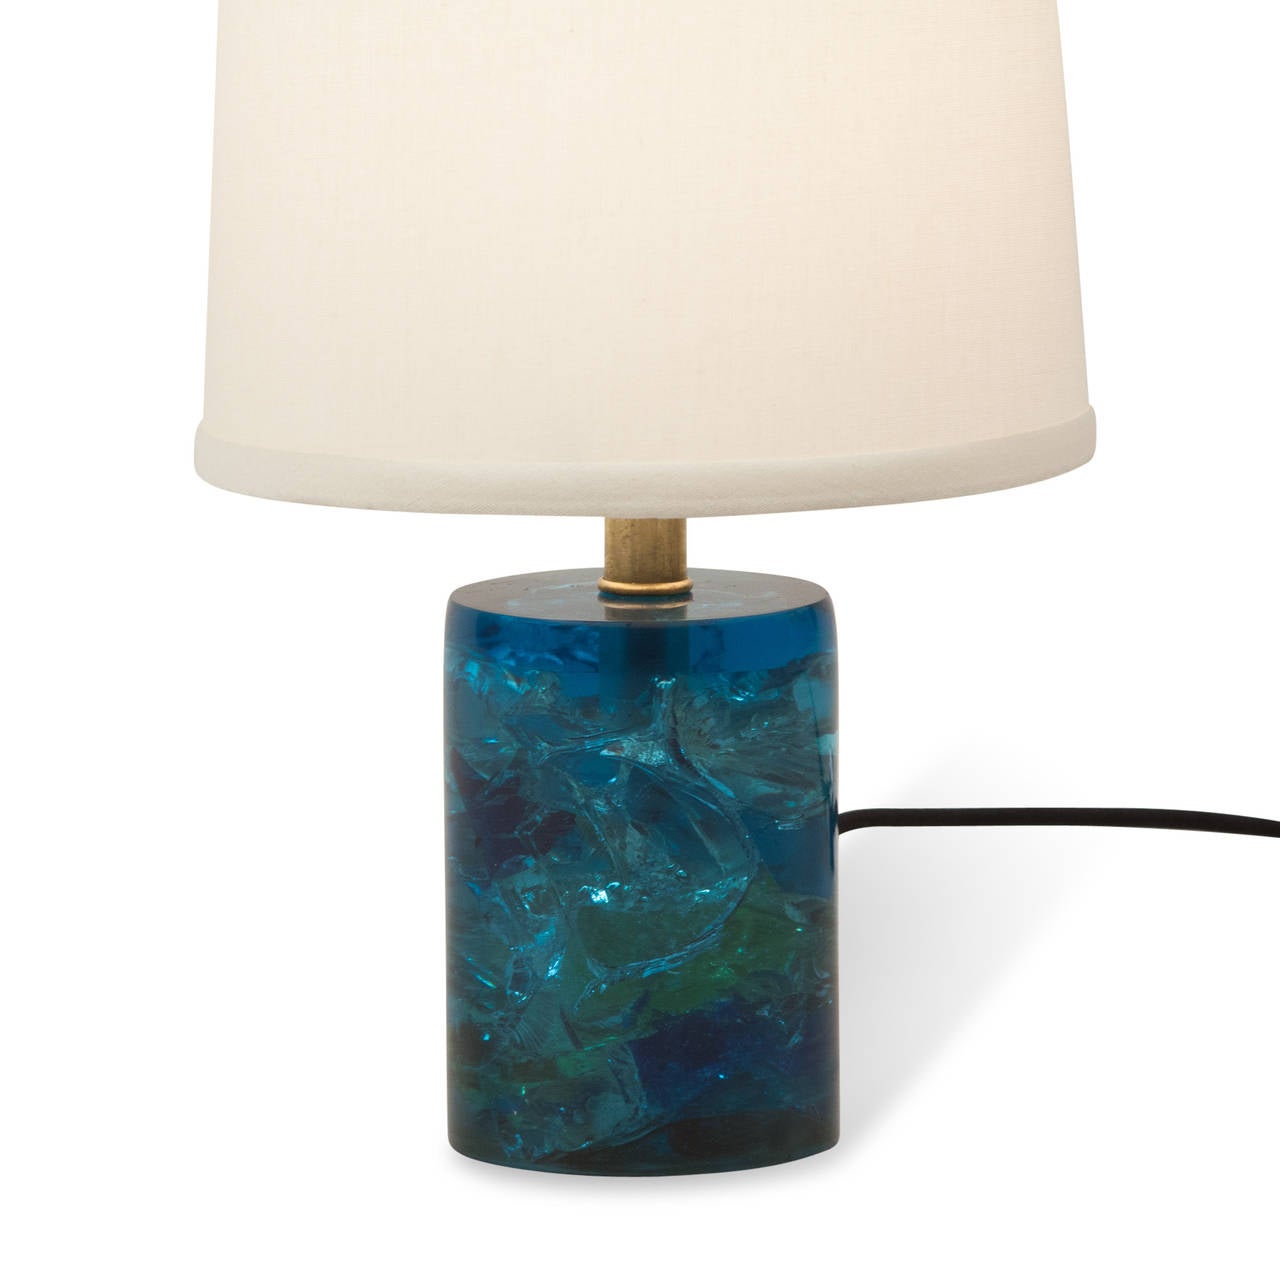 Linen Blue Crackle Resin Table Lamp, French 1970s